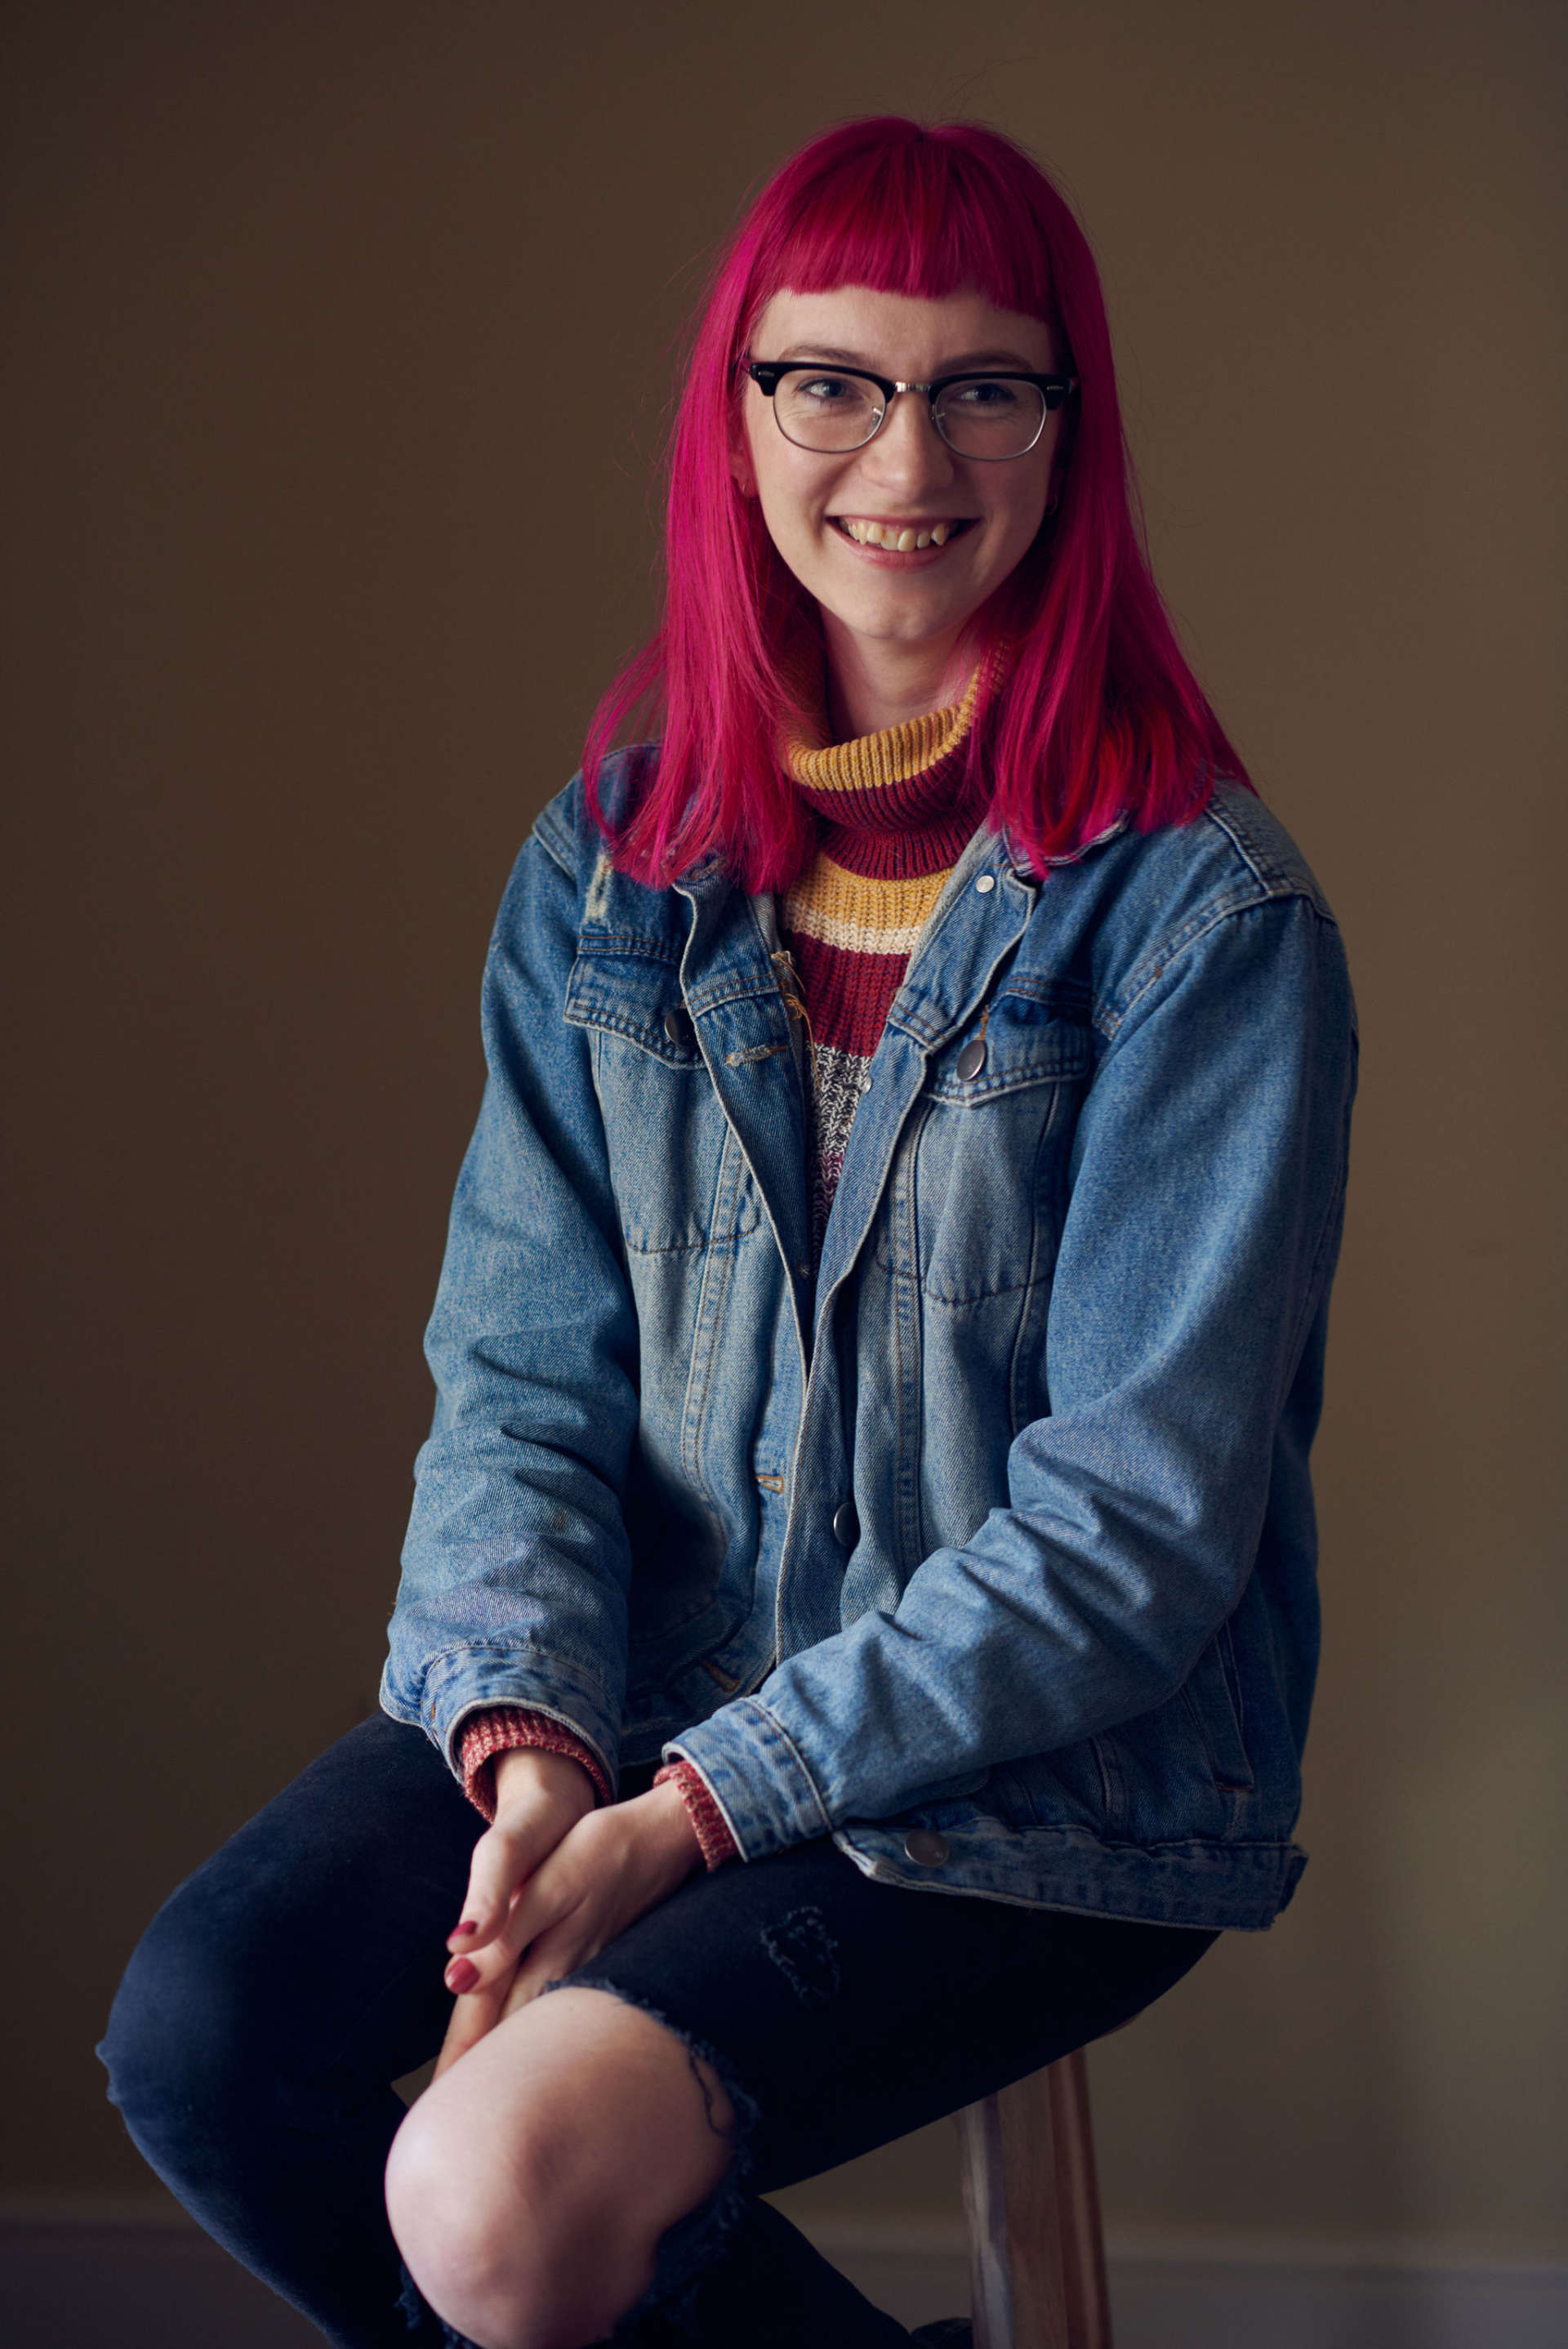 A headshot of the writer Josephine Newman. Jospehine has long dark pink hair and is wearing glasses. She is smiling at the camera.